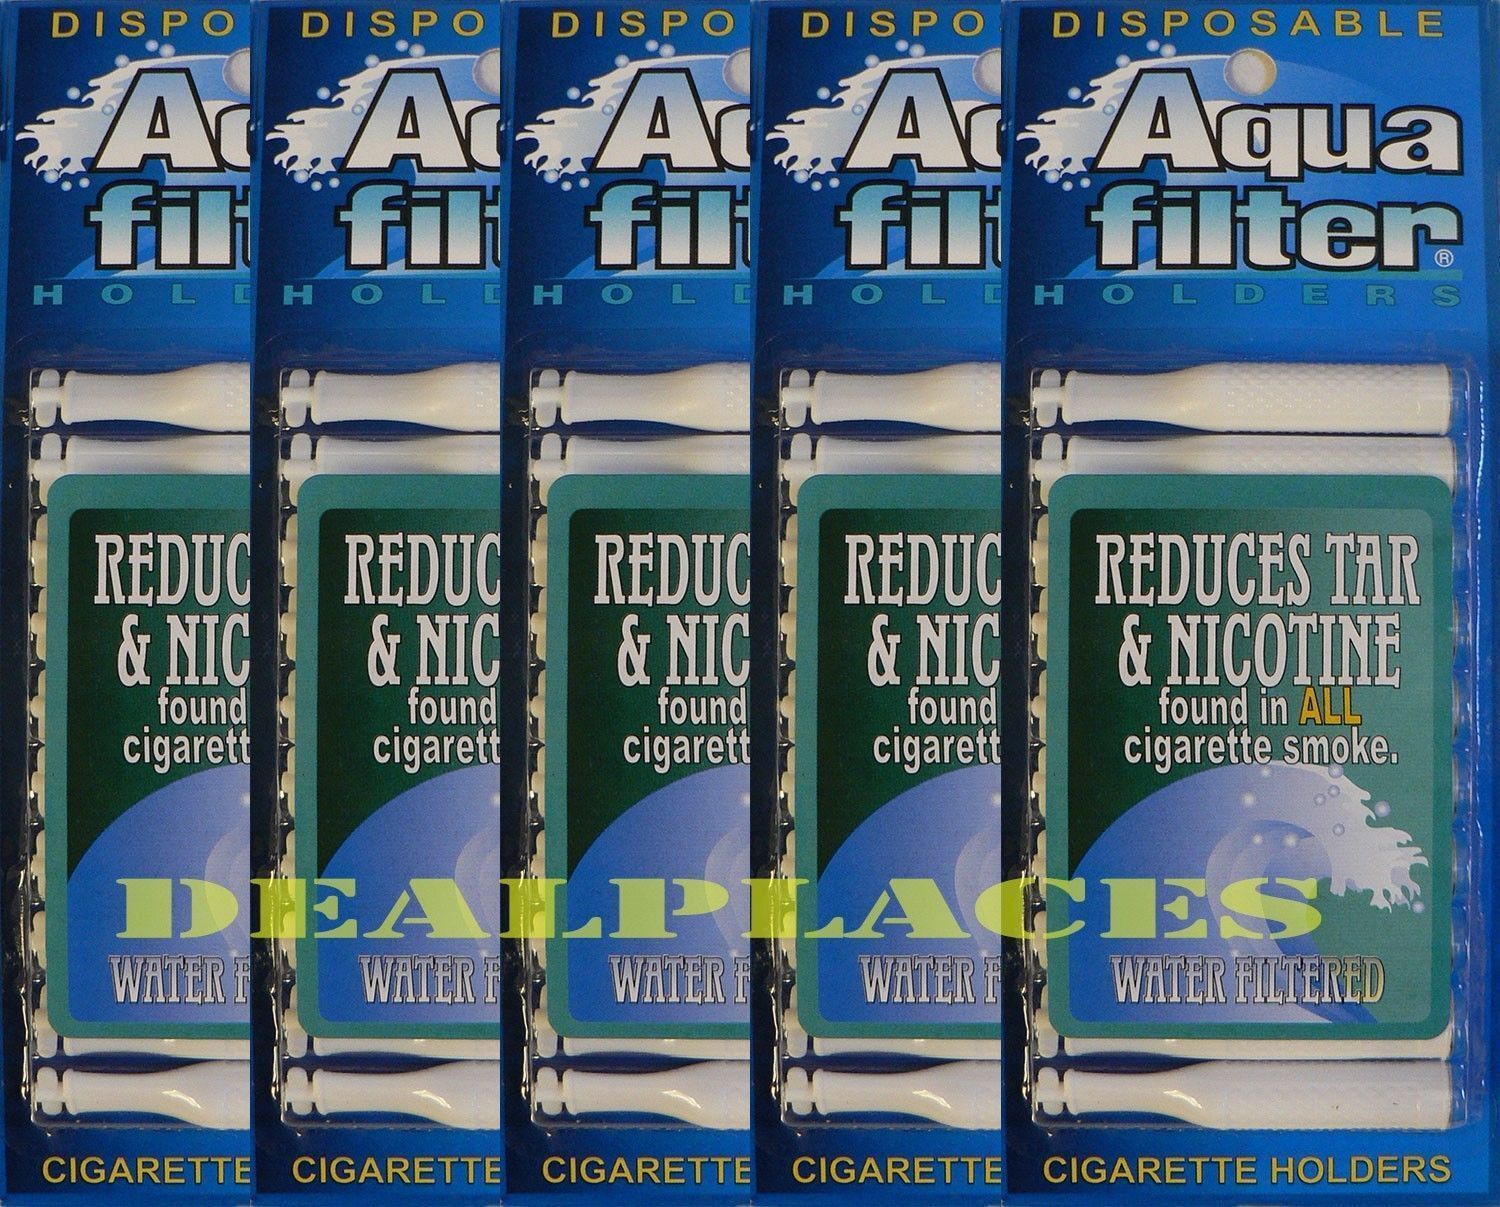 5 Packs Aquafilter Cigarette Filters TOTAL 50 filter Reduces Tar and Nicotine